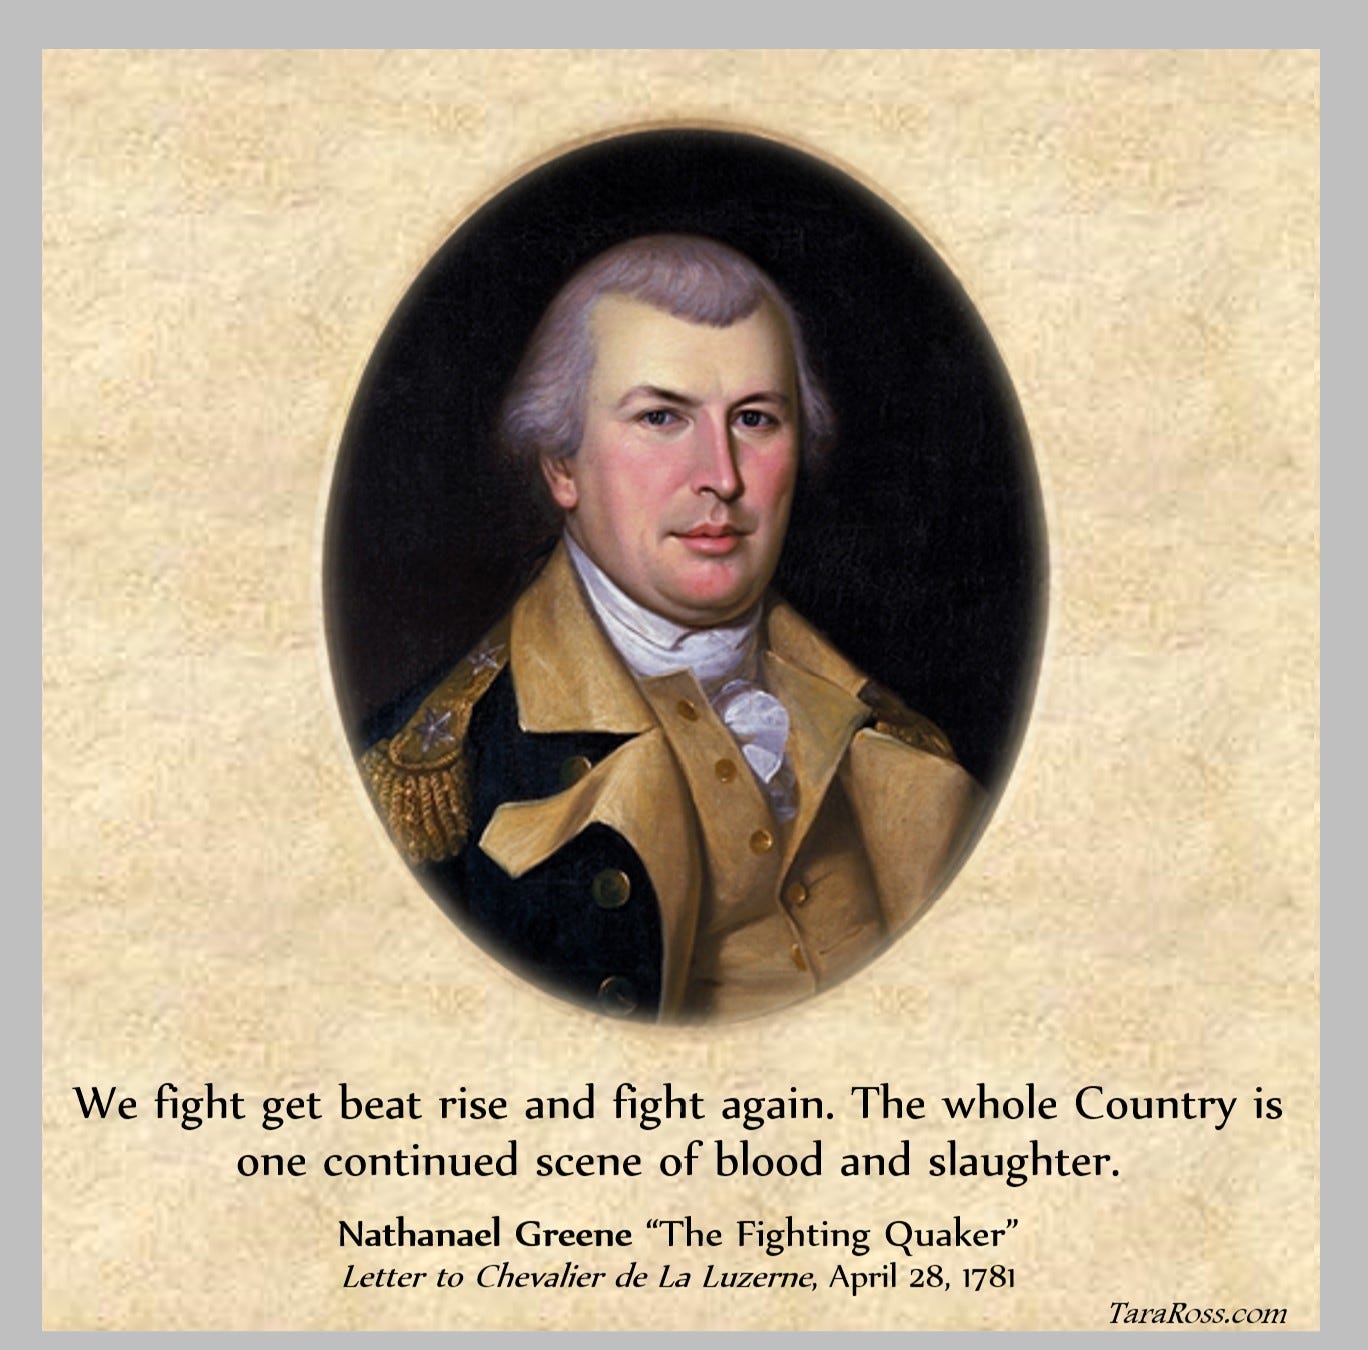 Photo of Nathanael Greene with his quote: "We fight get beat rise and fight again. The whole Country is one continued scene of blood and slaughter." -- Nathanael Greene “The Fighting Quaker,” Letter to Chevalier de La Luzerne (April 28, 1781)